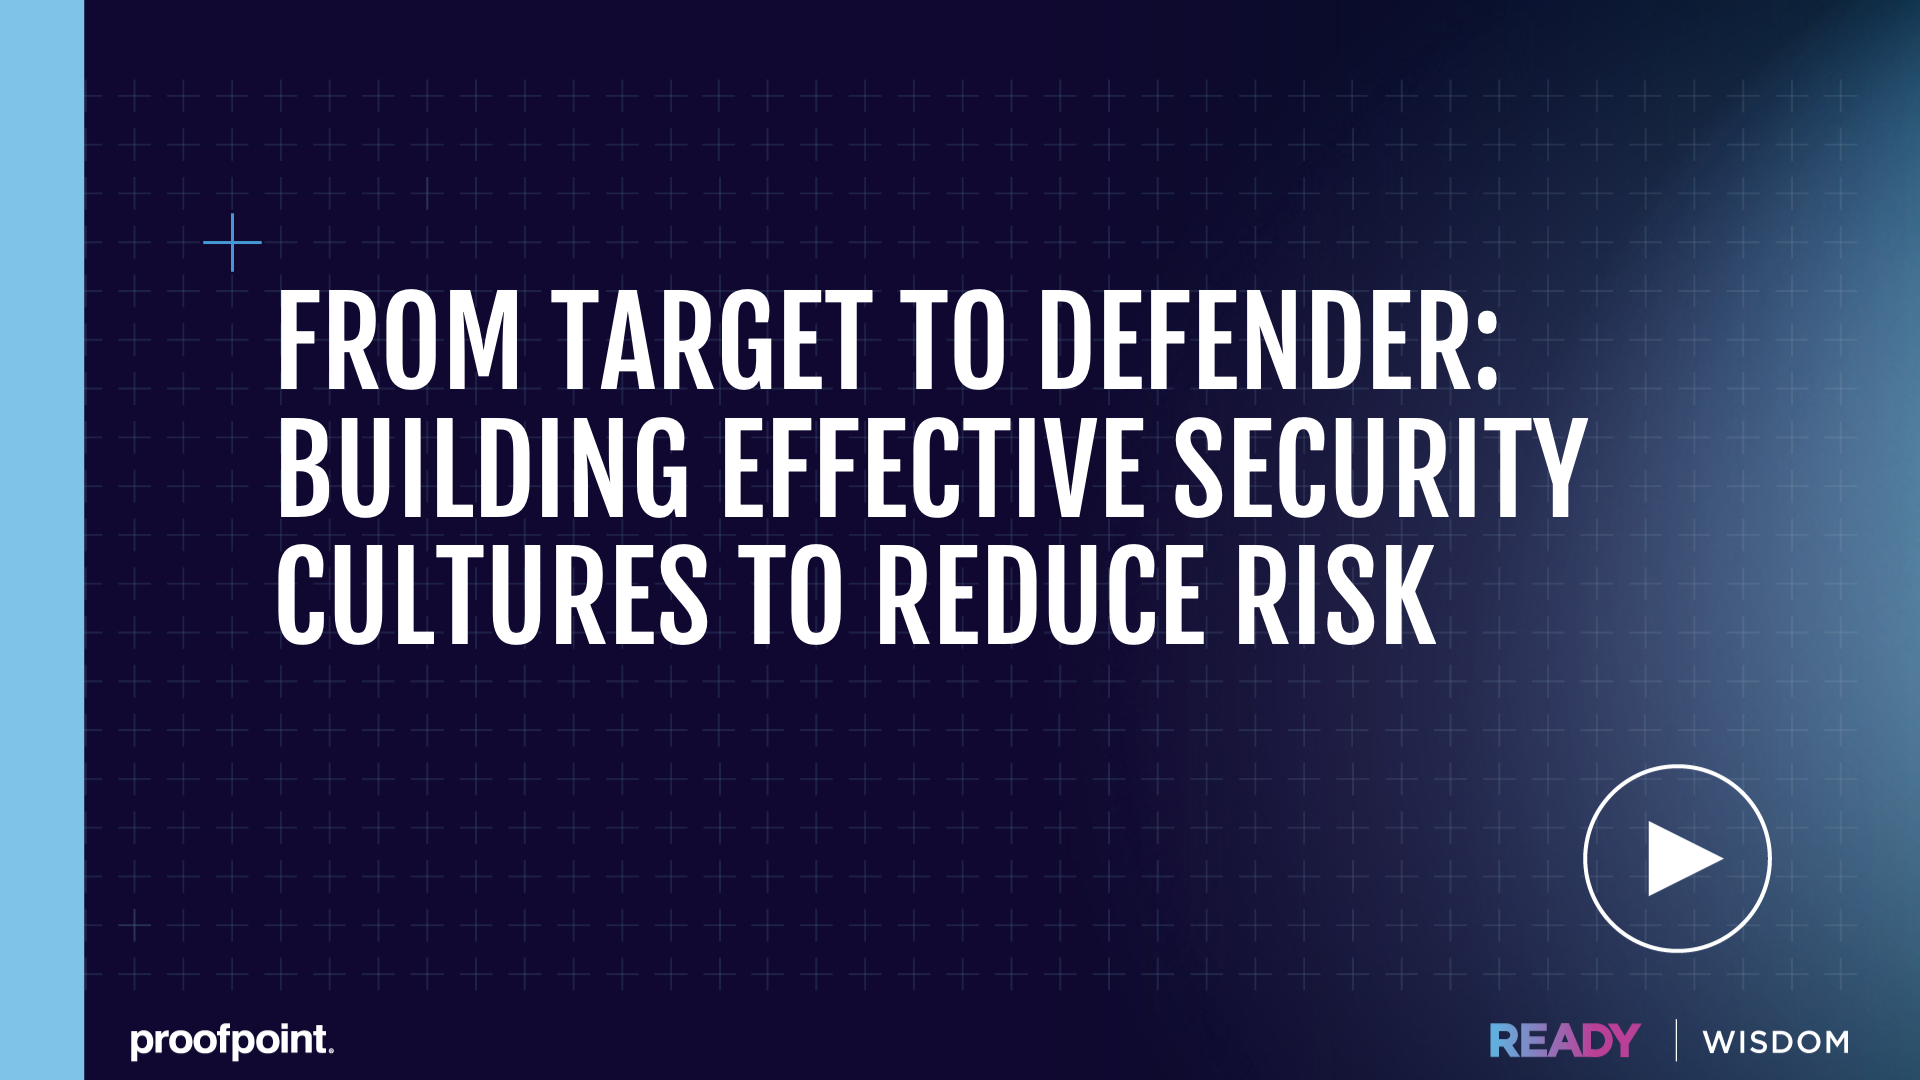 From Target to Defender: Building Effective Security Cultures to Reduce Risk